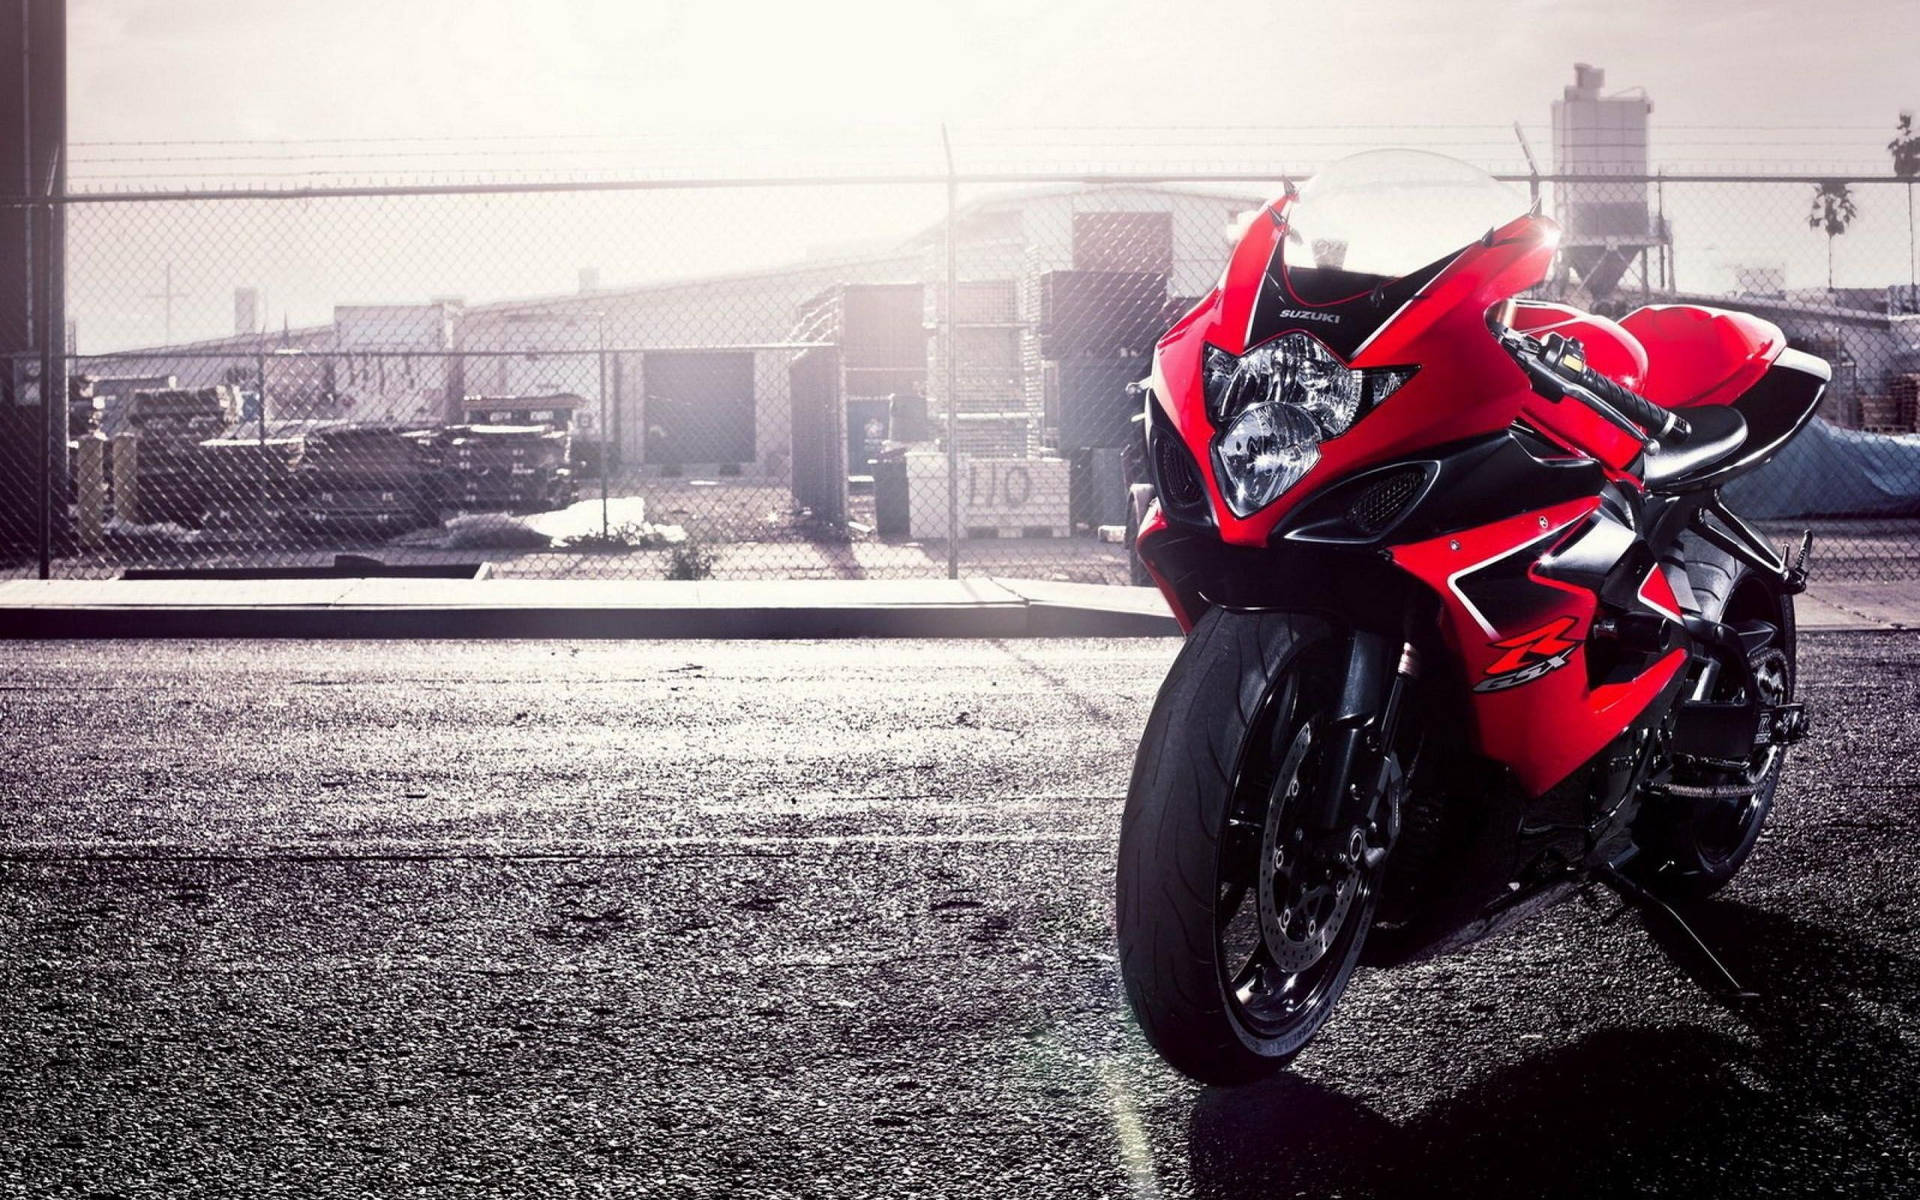 Power And Agility On Red Suzuki Gsx. Background